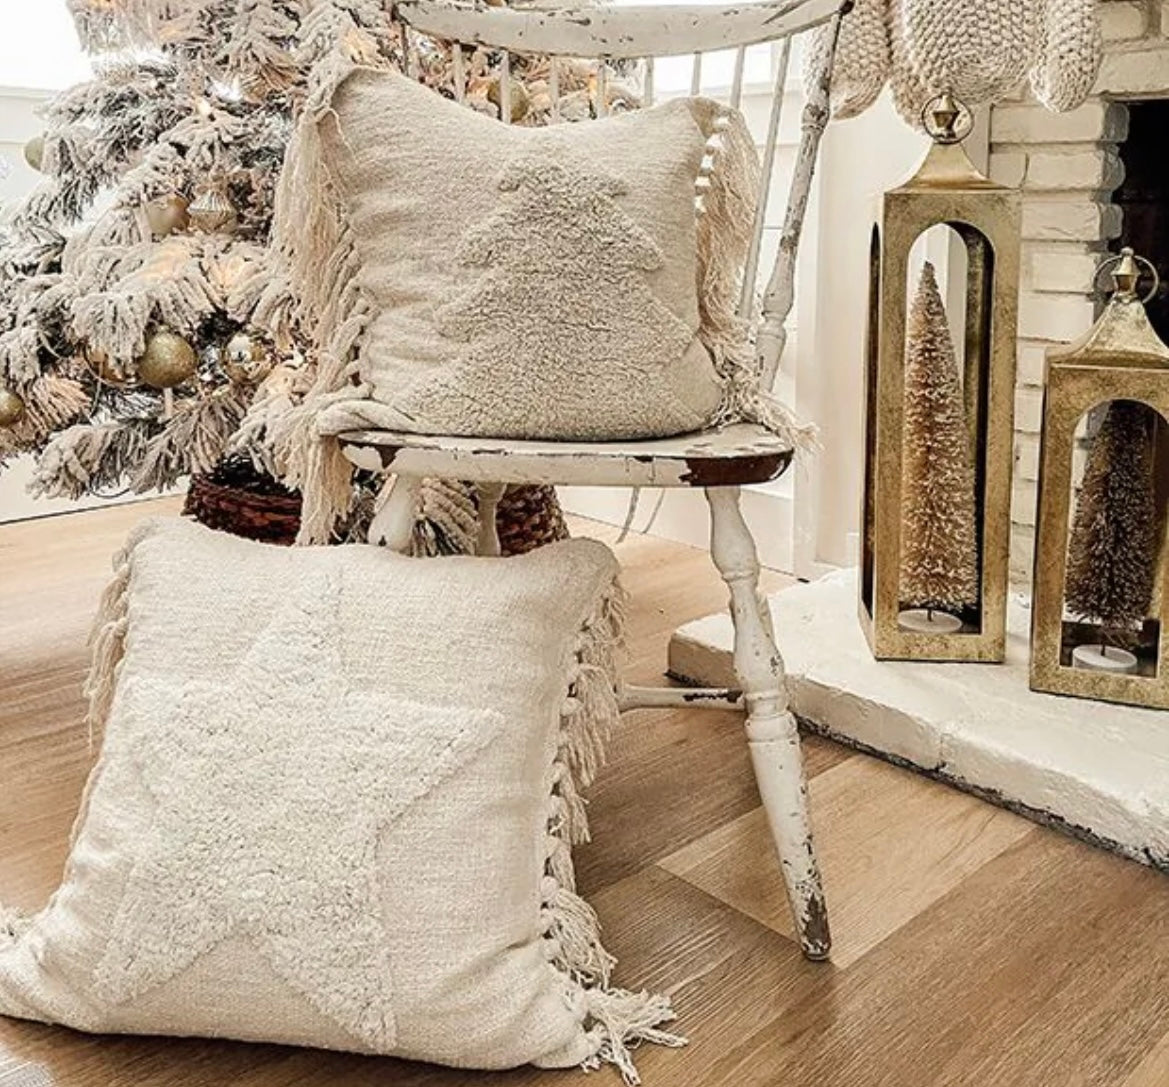 Punch Hook Cotton Blend Holiday Pillows || Cream - 2-Styles